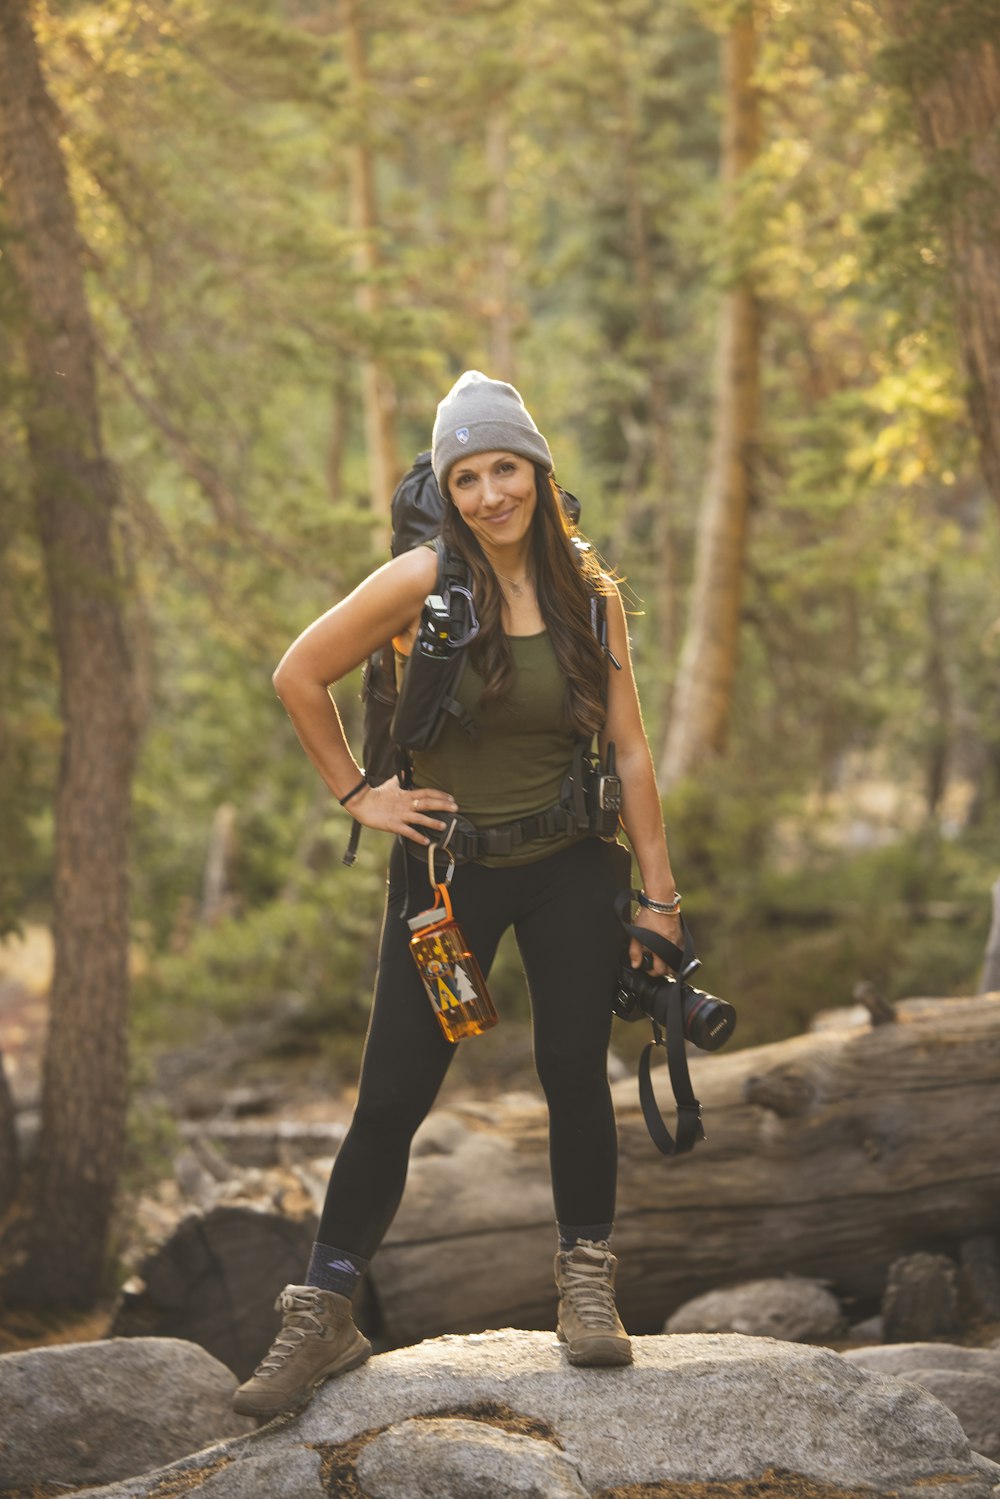 Woman in brown t-shirt and white cap standing on brown wooden log during  daytime photo – Free Yosemite Image on Unsplash